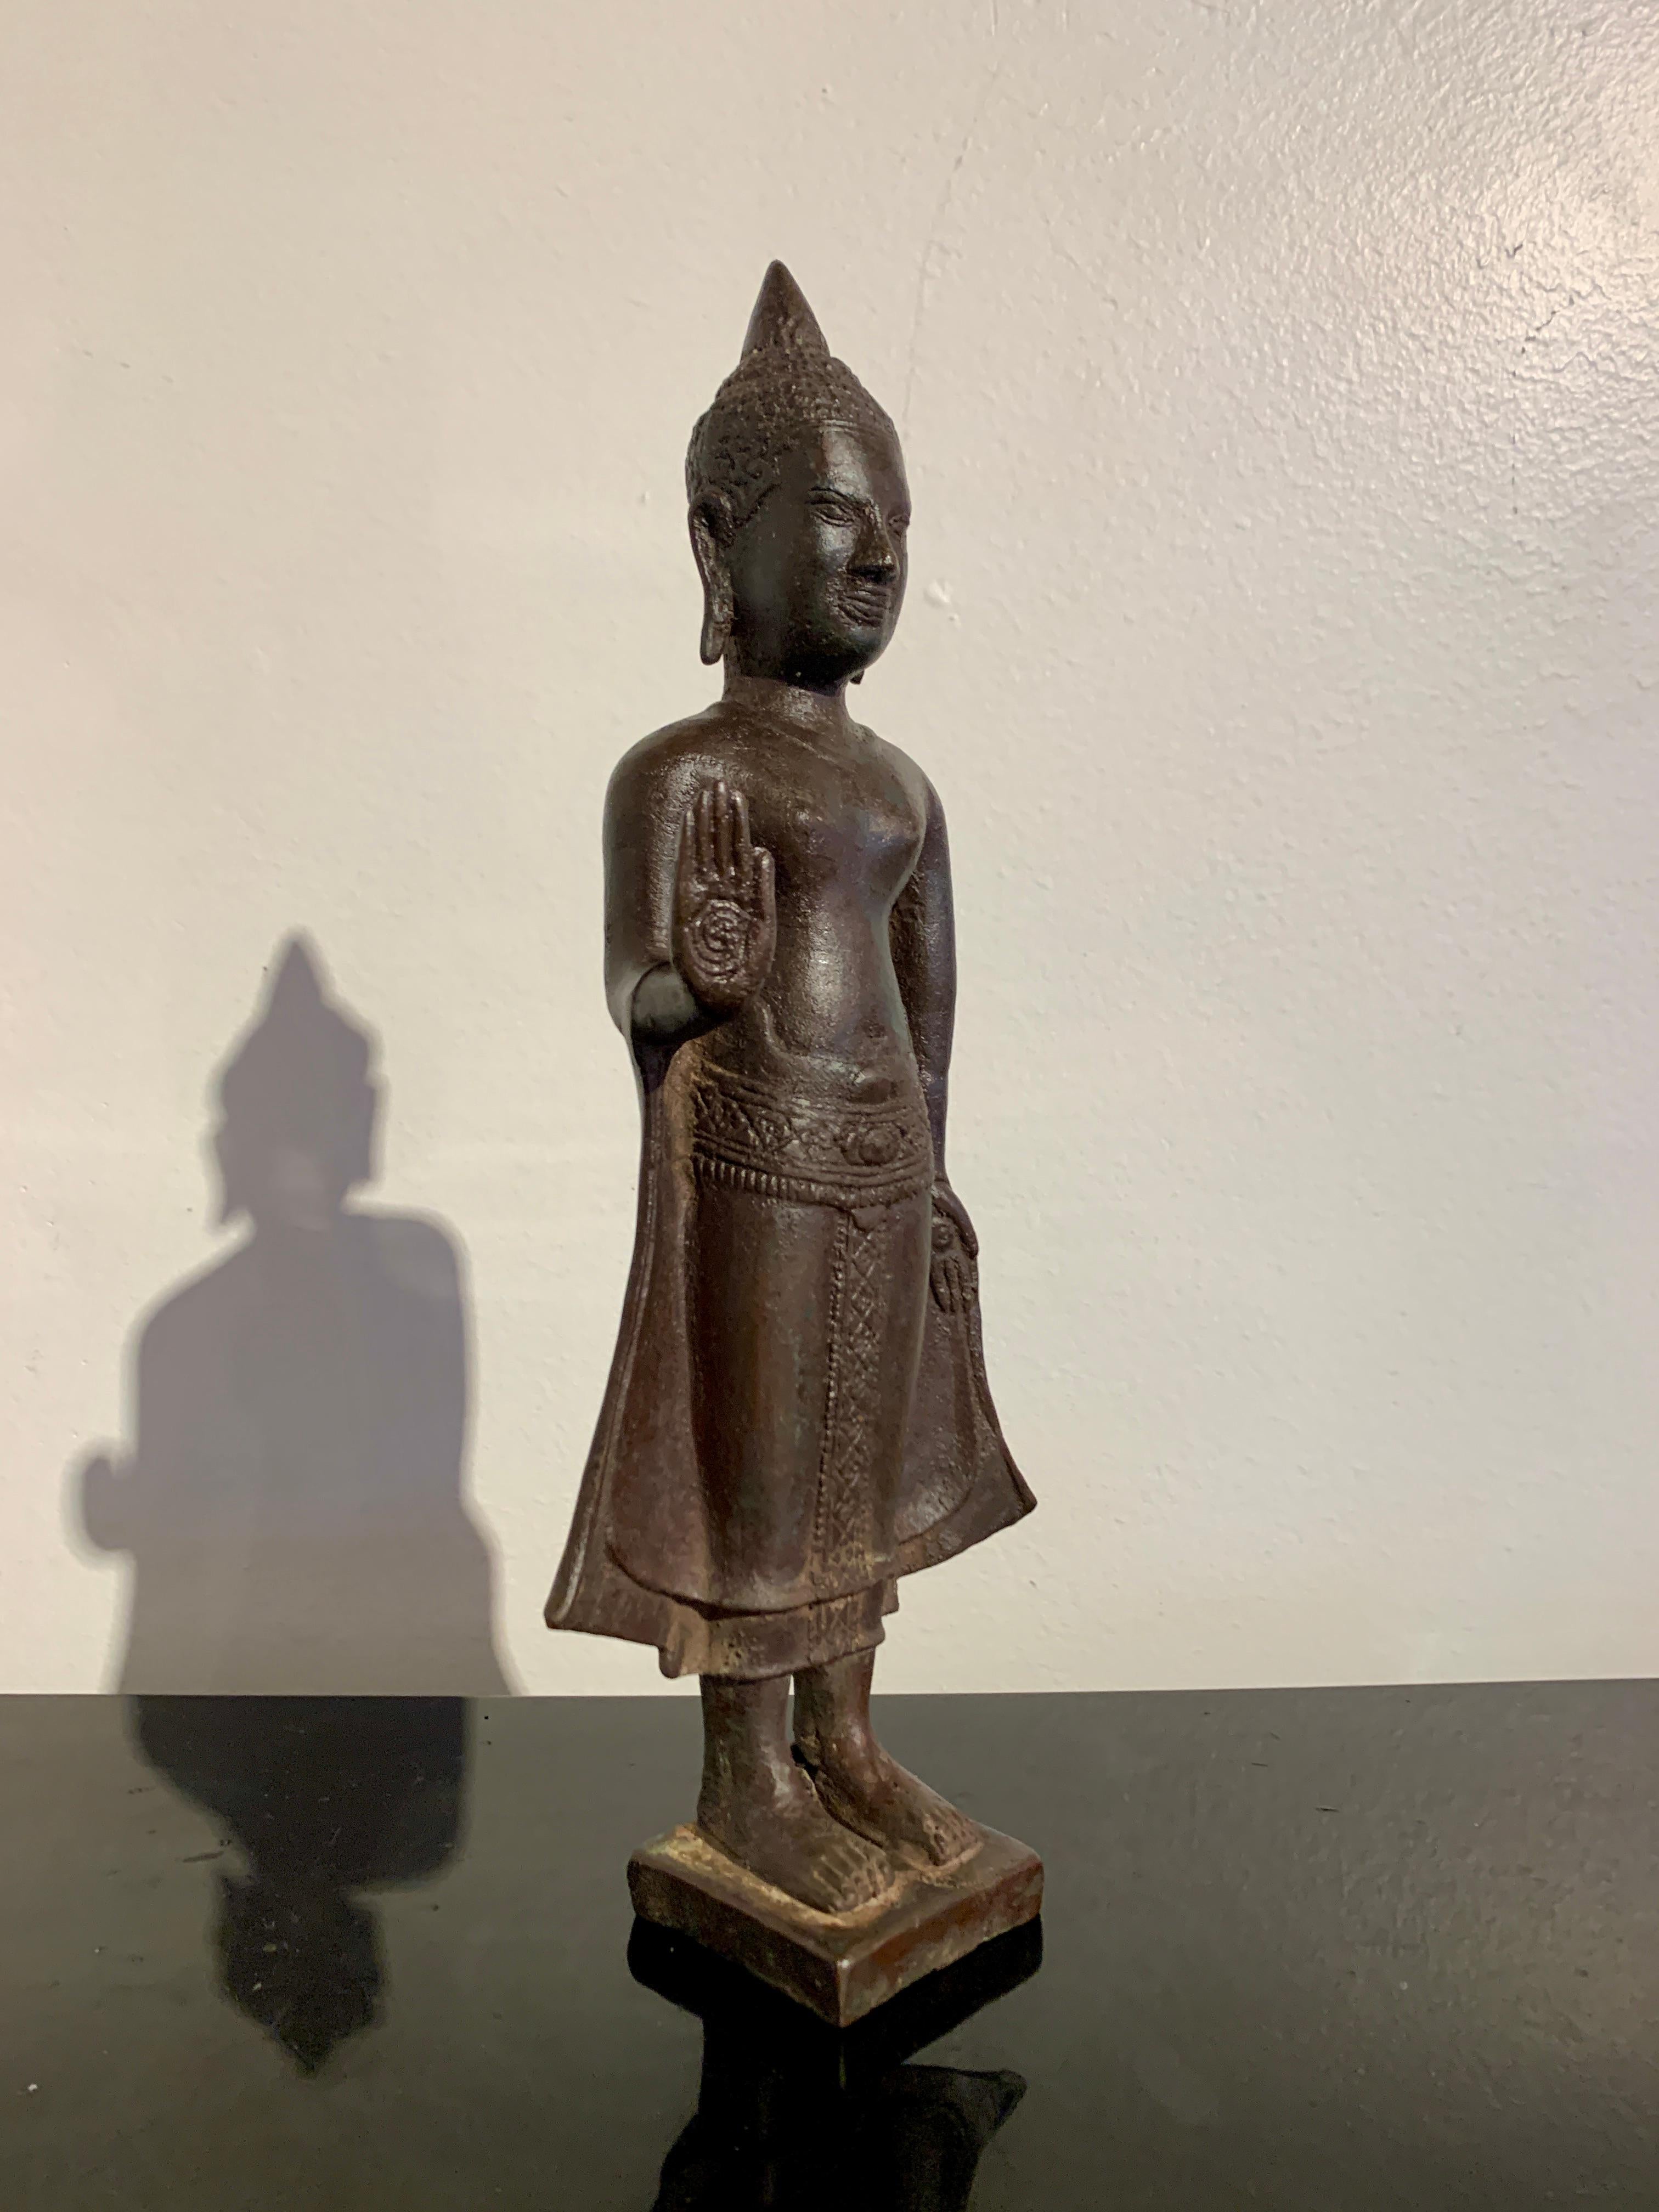 A lovely vintage Khmer style cast and patinated bronze figure of a standing Buddha, mid-20th century, Thailand or Cambodia. 

The Buddha is portrayed standing upright upon a low, plain square plinth. He is dressed in dhoti with decorated hems, and